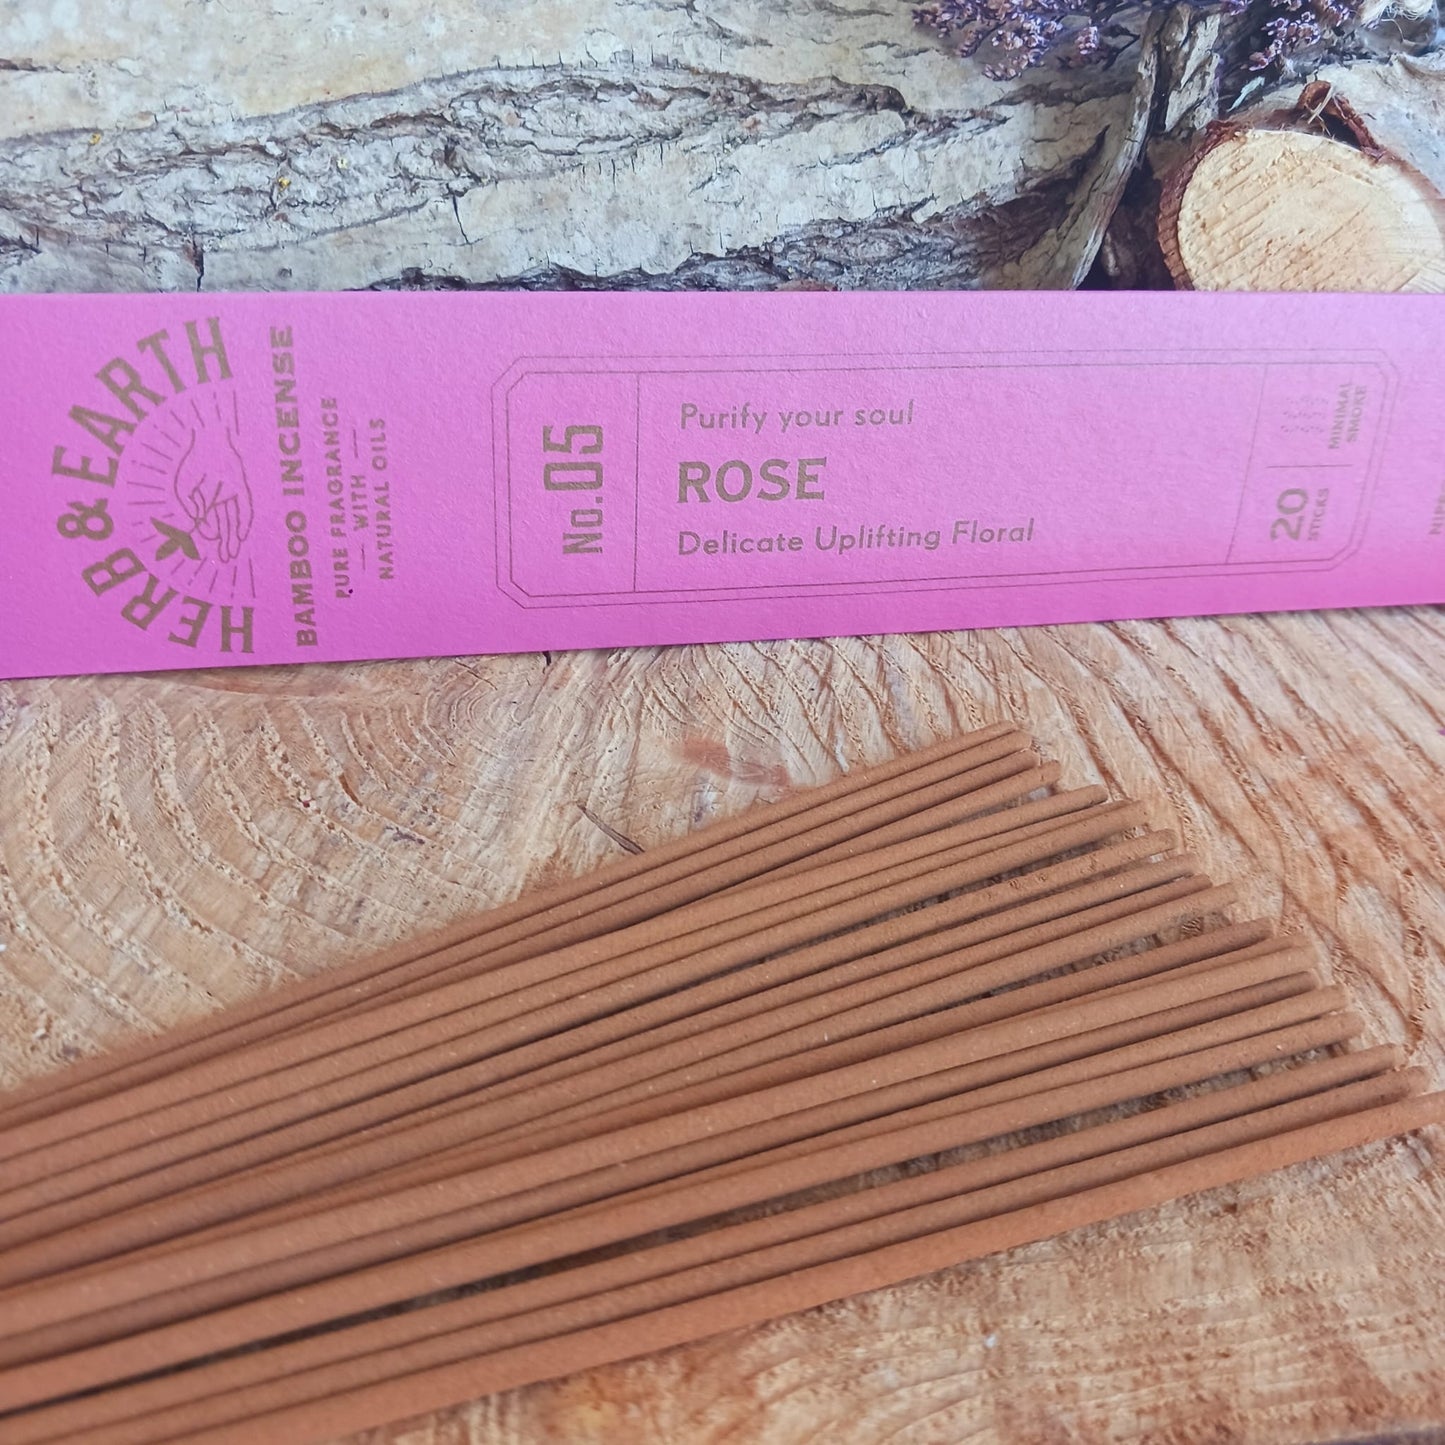 Herb & Earth Bamboo Incense Sticks | Rose